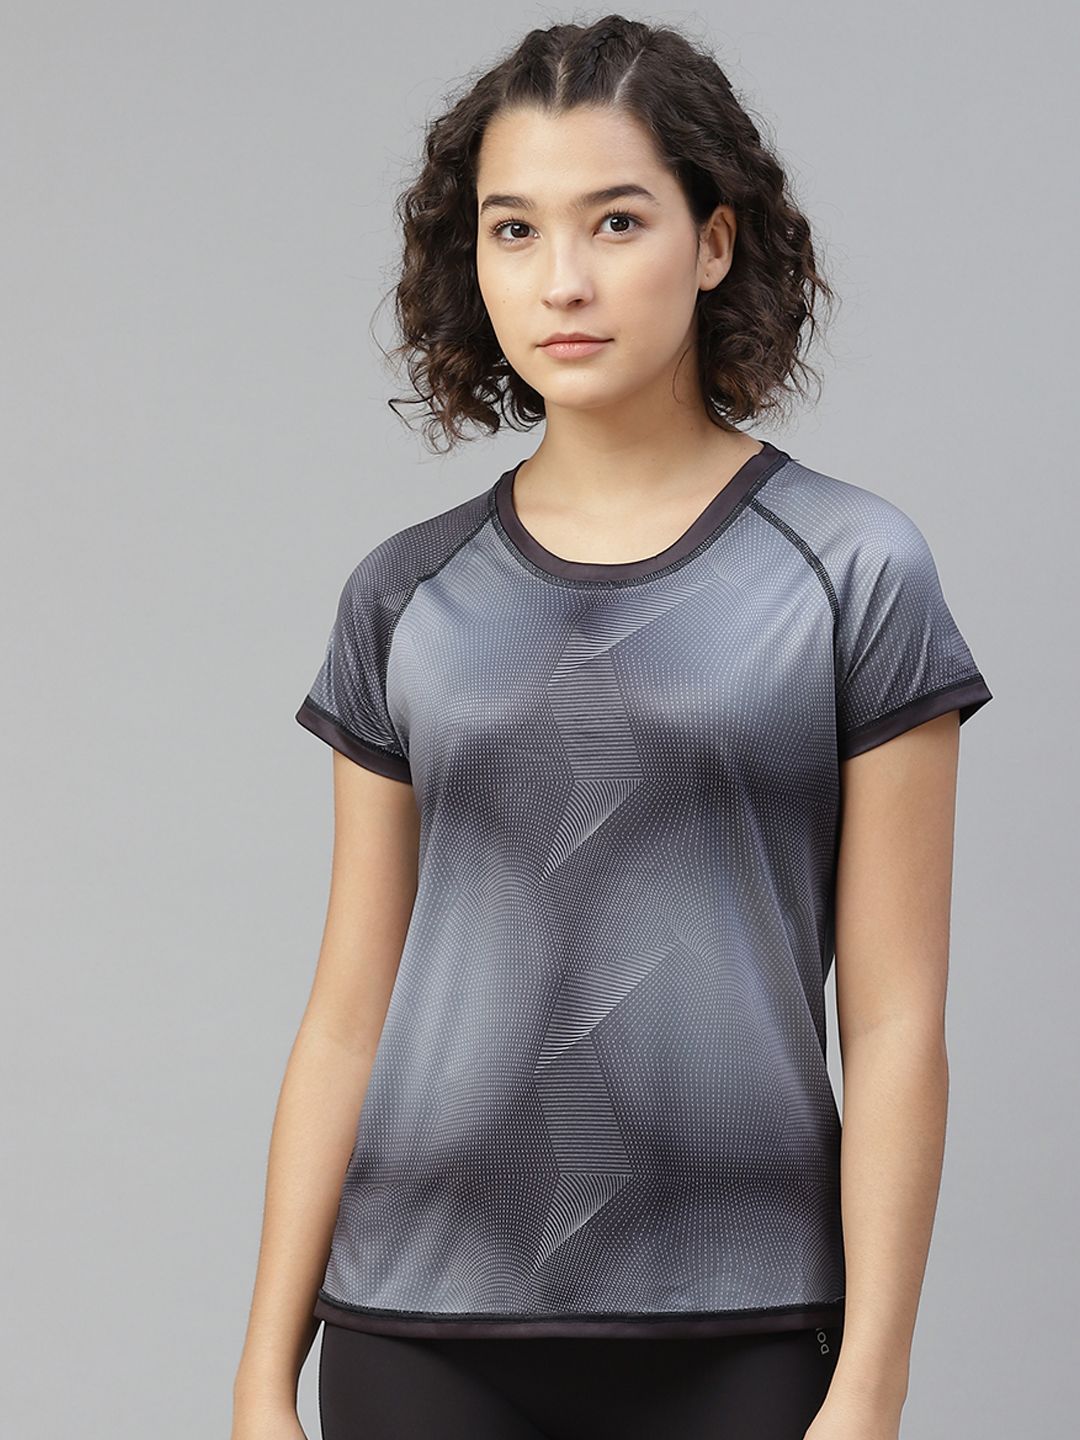 HRX by Hrithik Roshan Women Grey Aop Reversible Rapid-Dry Antimicrobial Training T-shirt Price in India